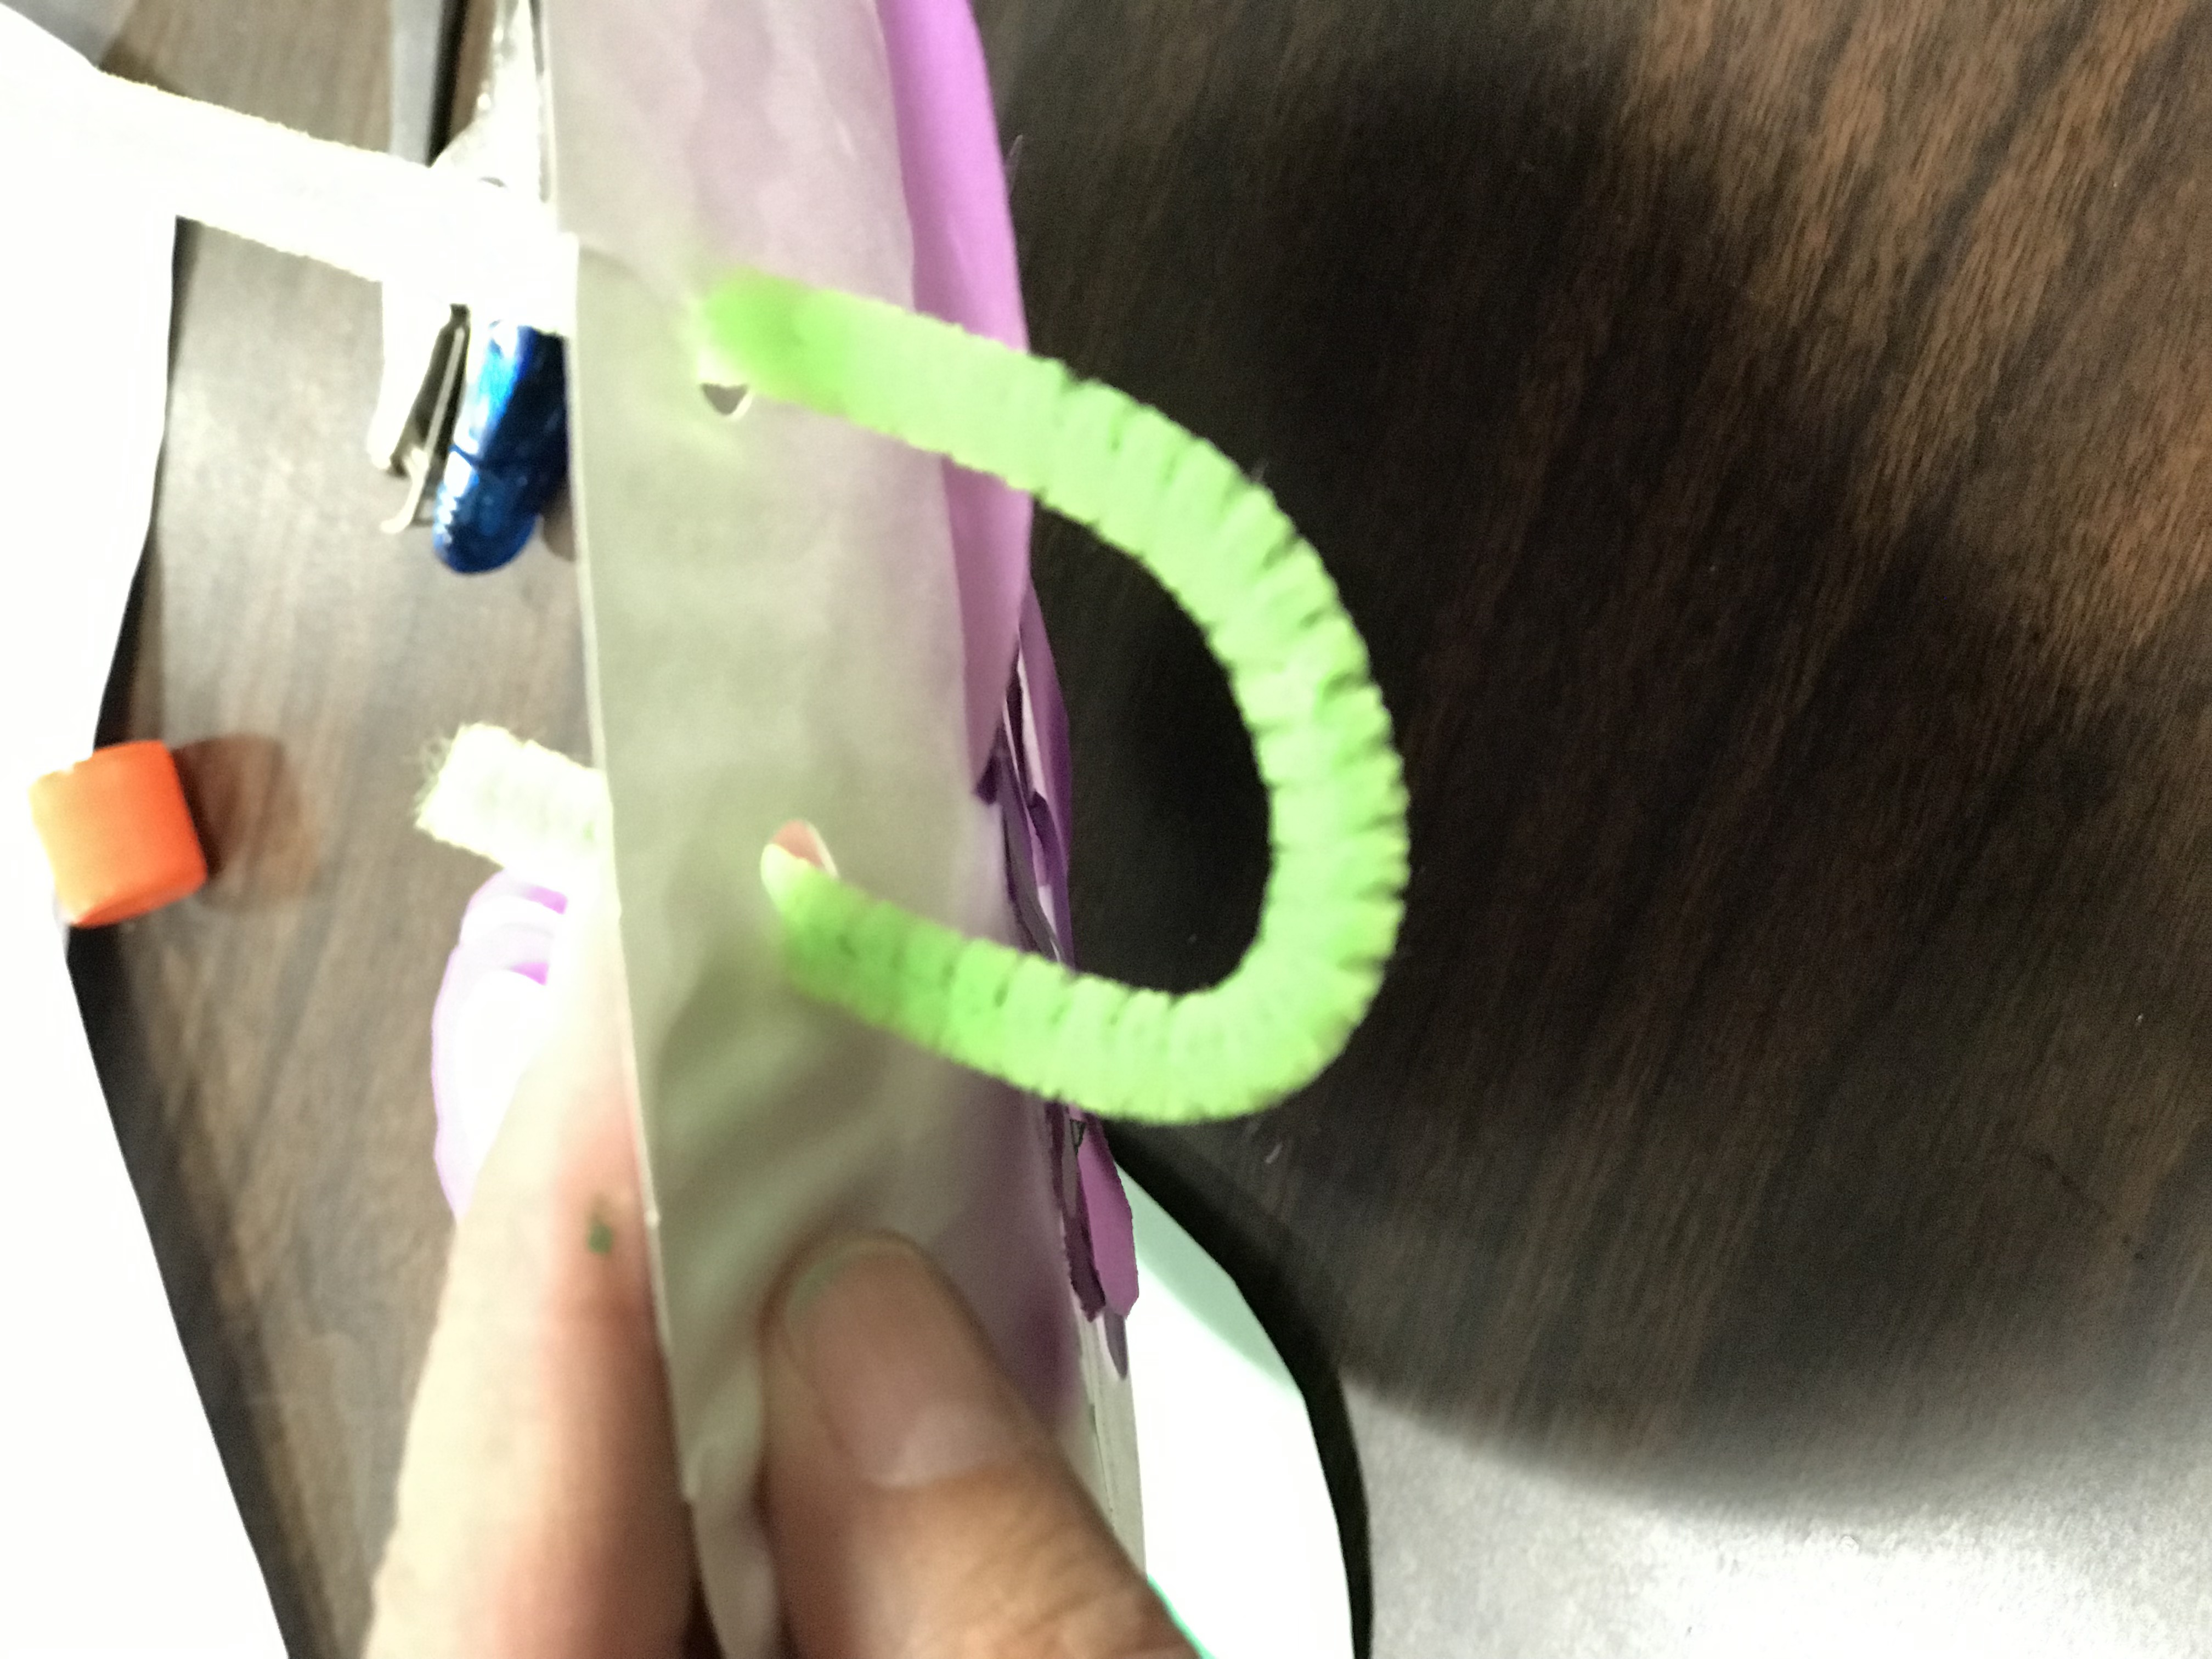 Feeding pipe cleaner stem through hole punched paper plate